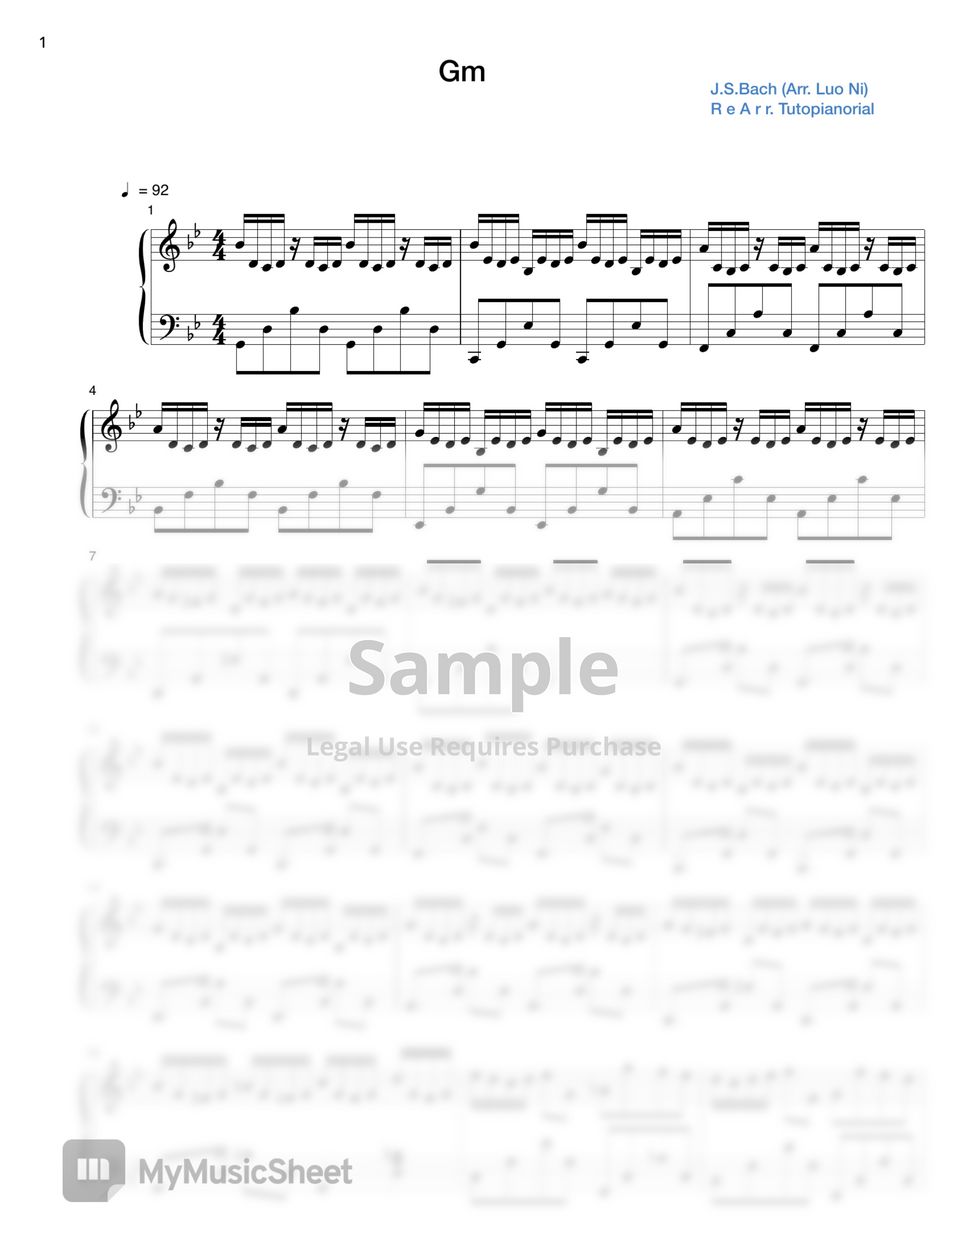 J. S. Bach (Luo Ni) - G Minor Bach (Piano Tiles 2) by Tutopianorial